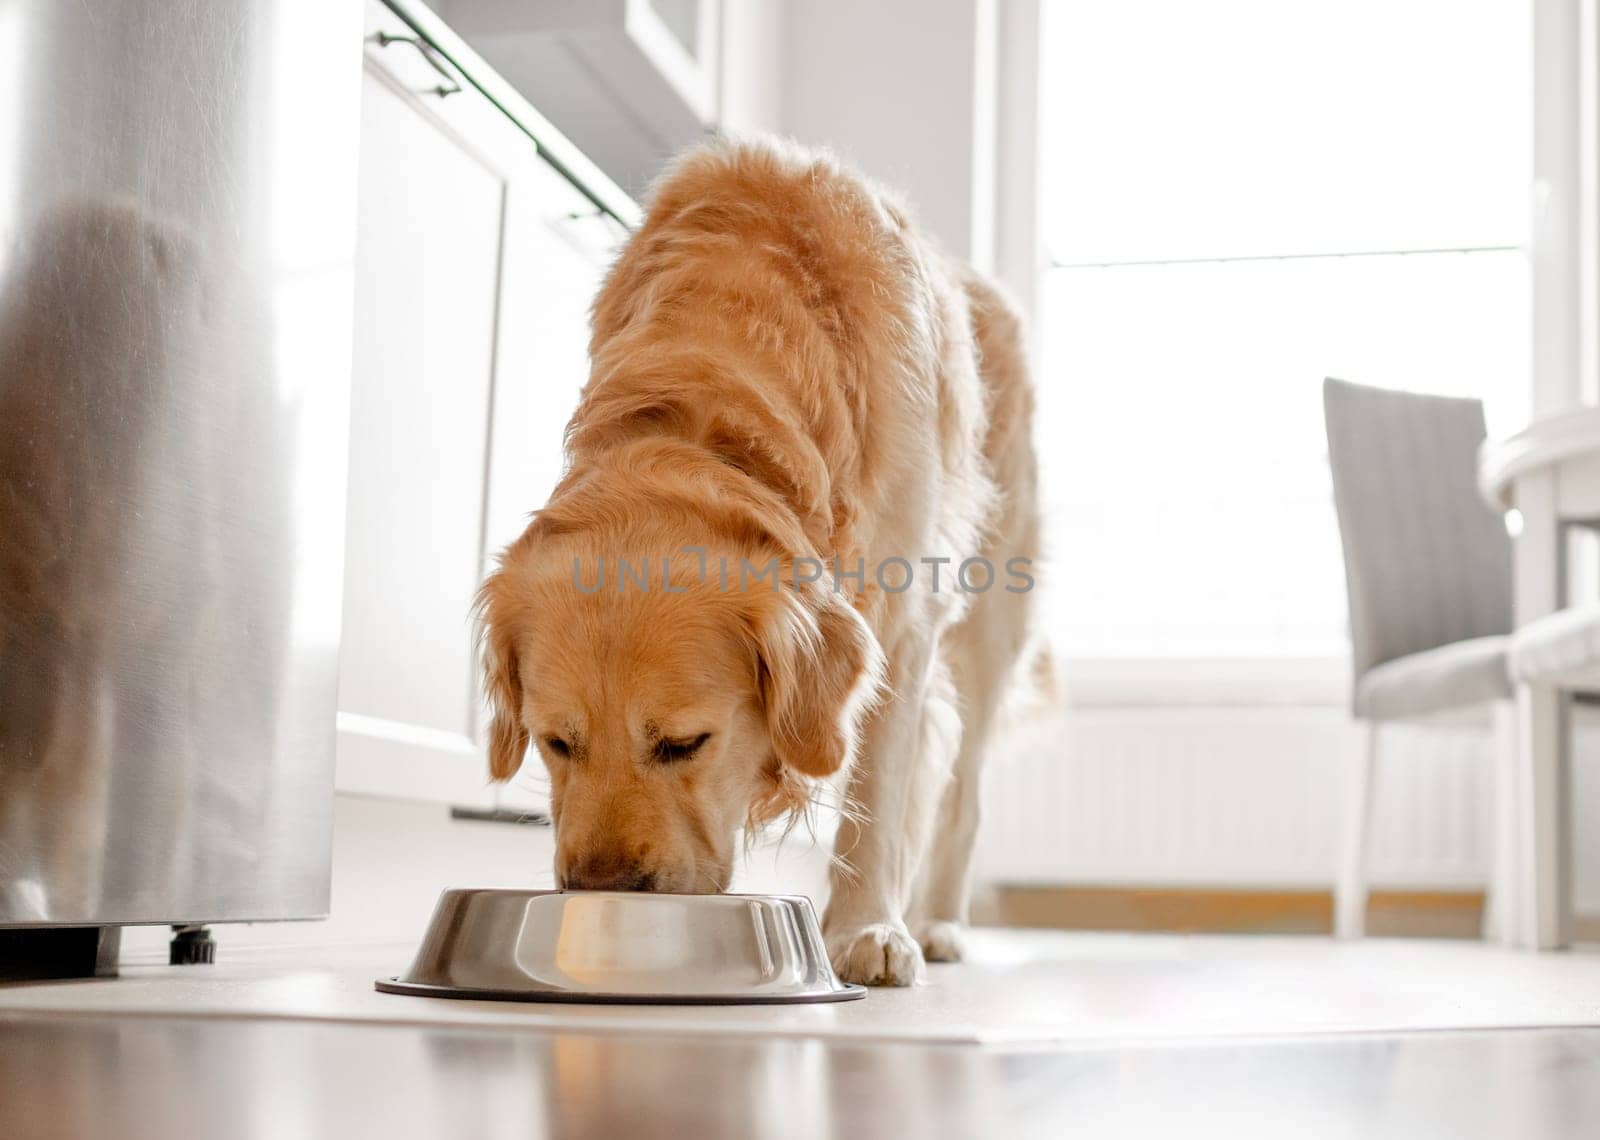 Golden Retriever Dog Eats From Bowl In Kitchen With Bright Interior